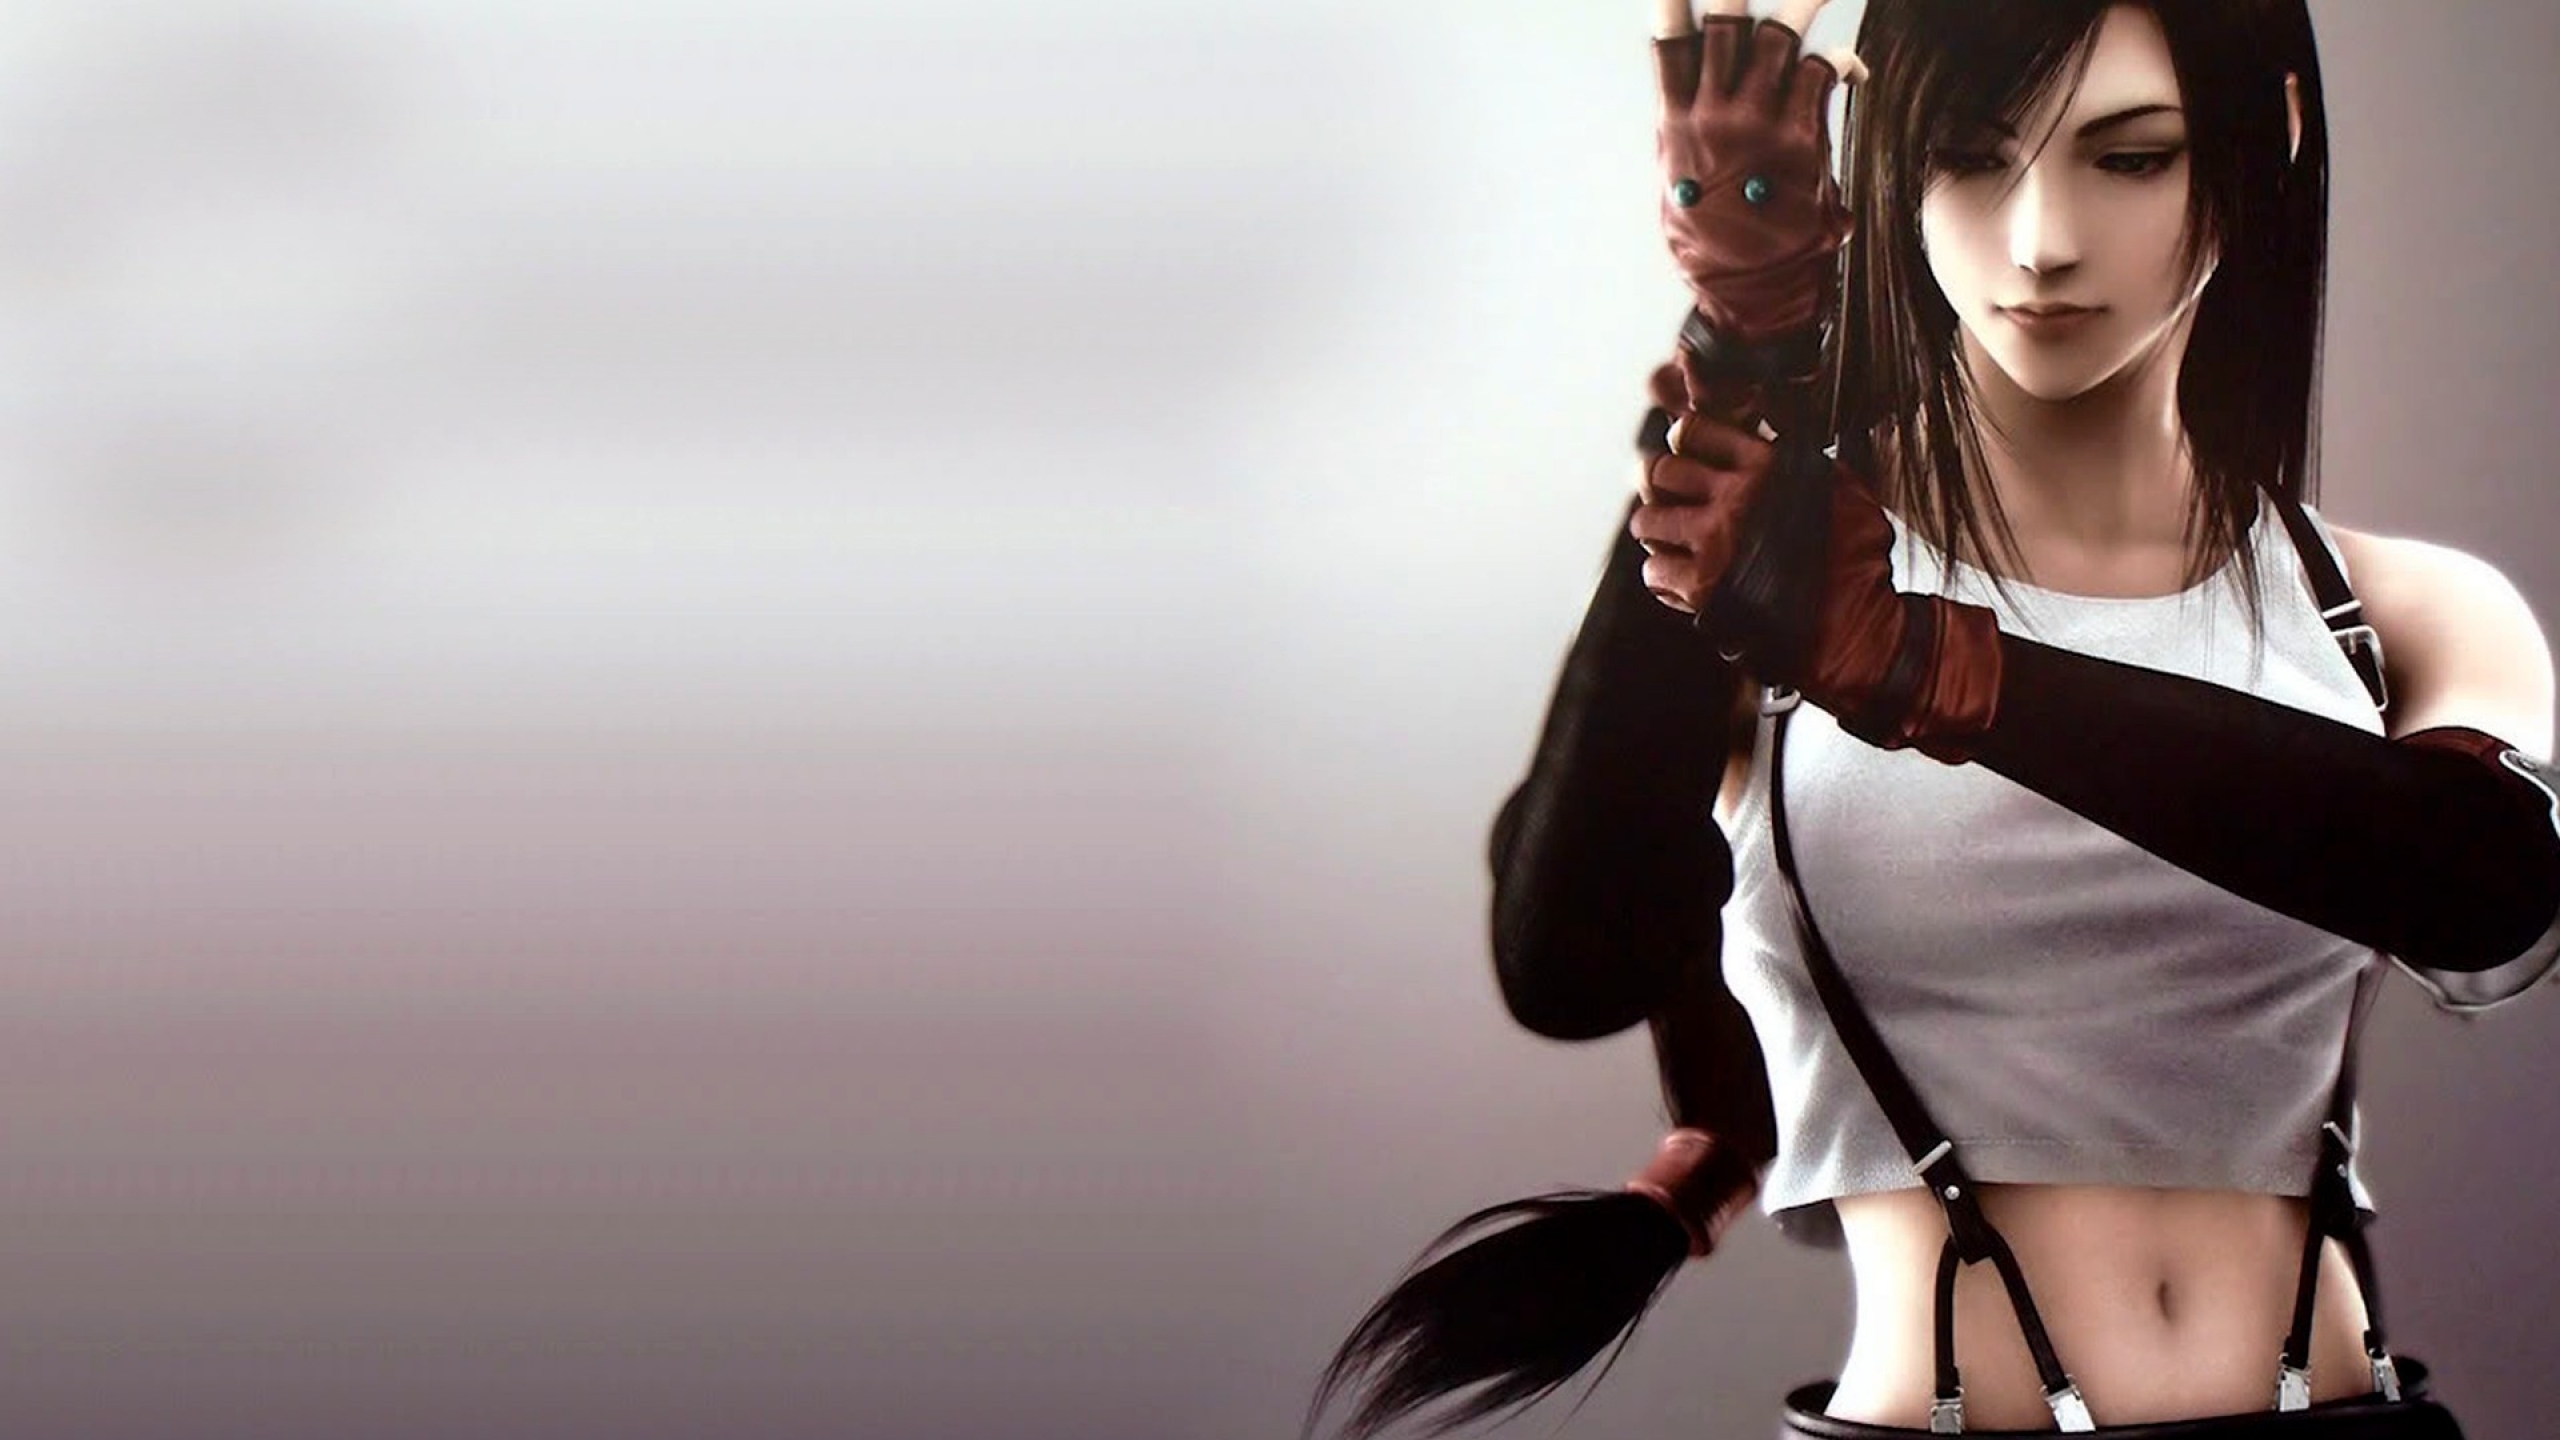 100+ Tifa Lockhart HD Wallpapers and Backgrounds